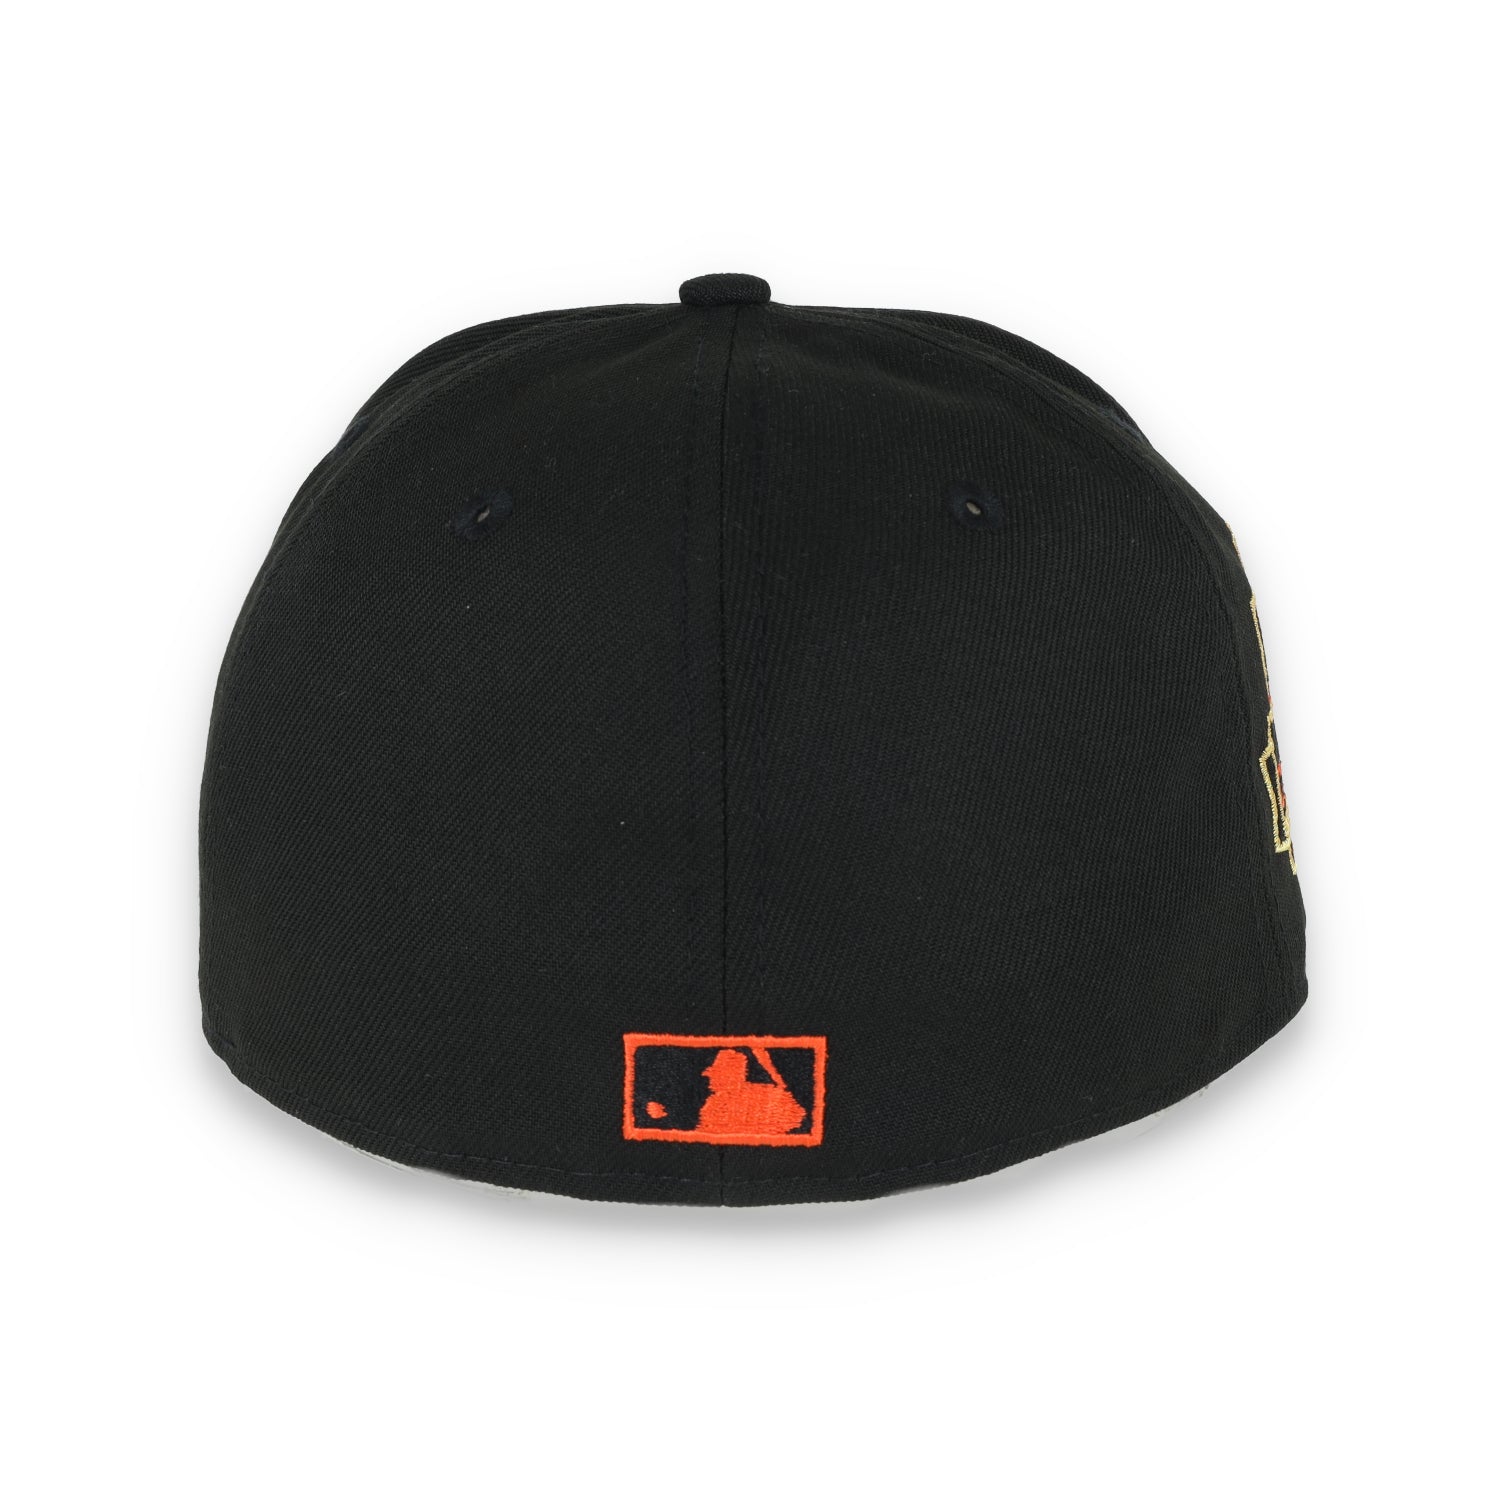 New Era San Francisco Giants "Gigantes"  World Champions 2014 Side Patch 59FIFTY Fitted - Black